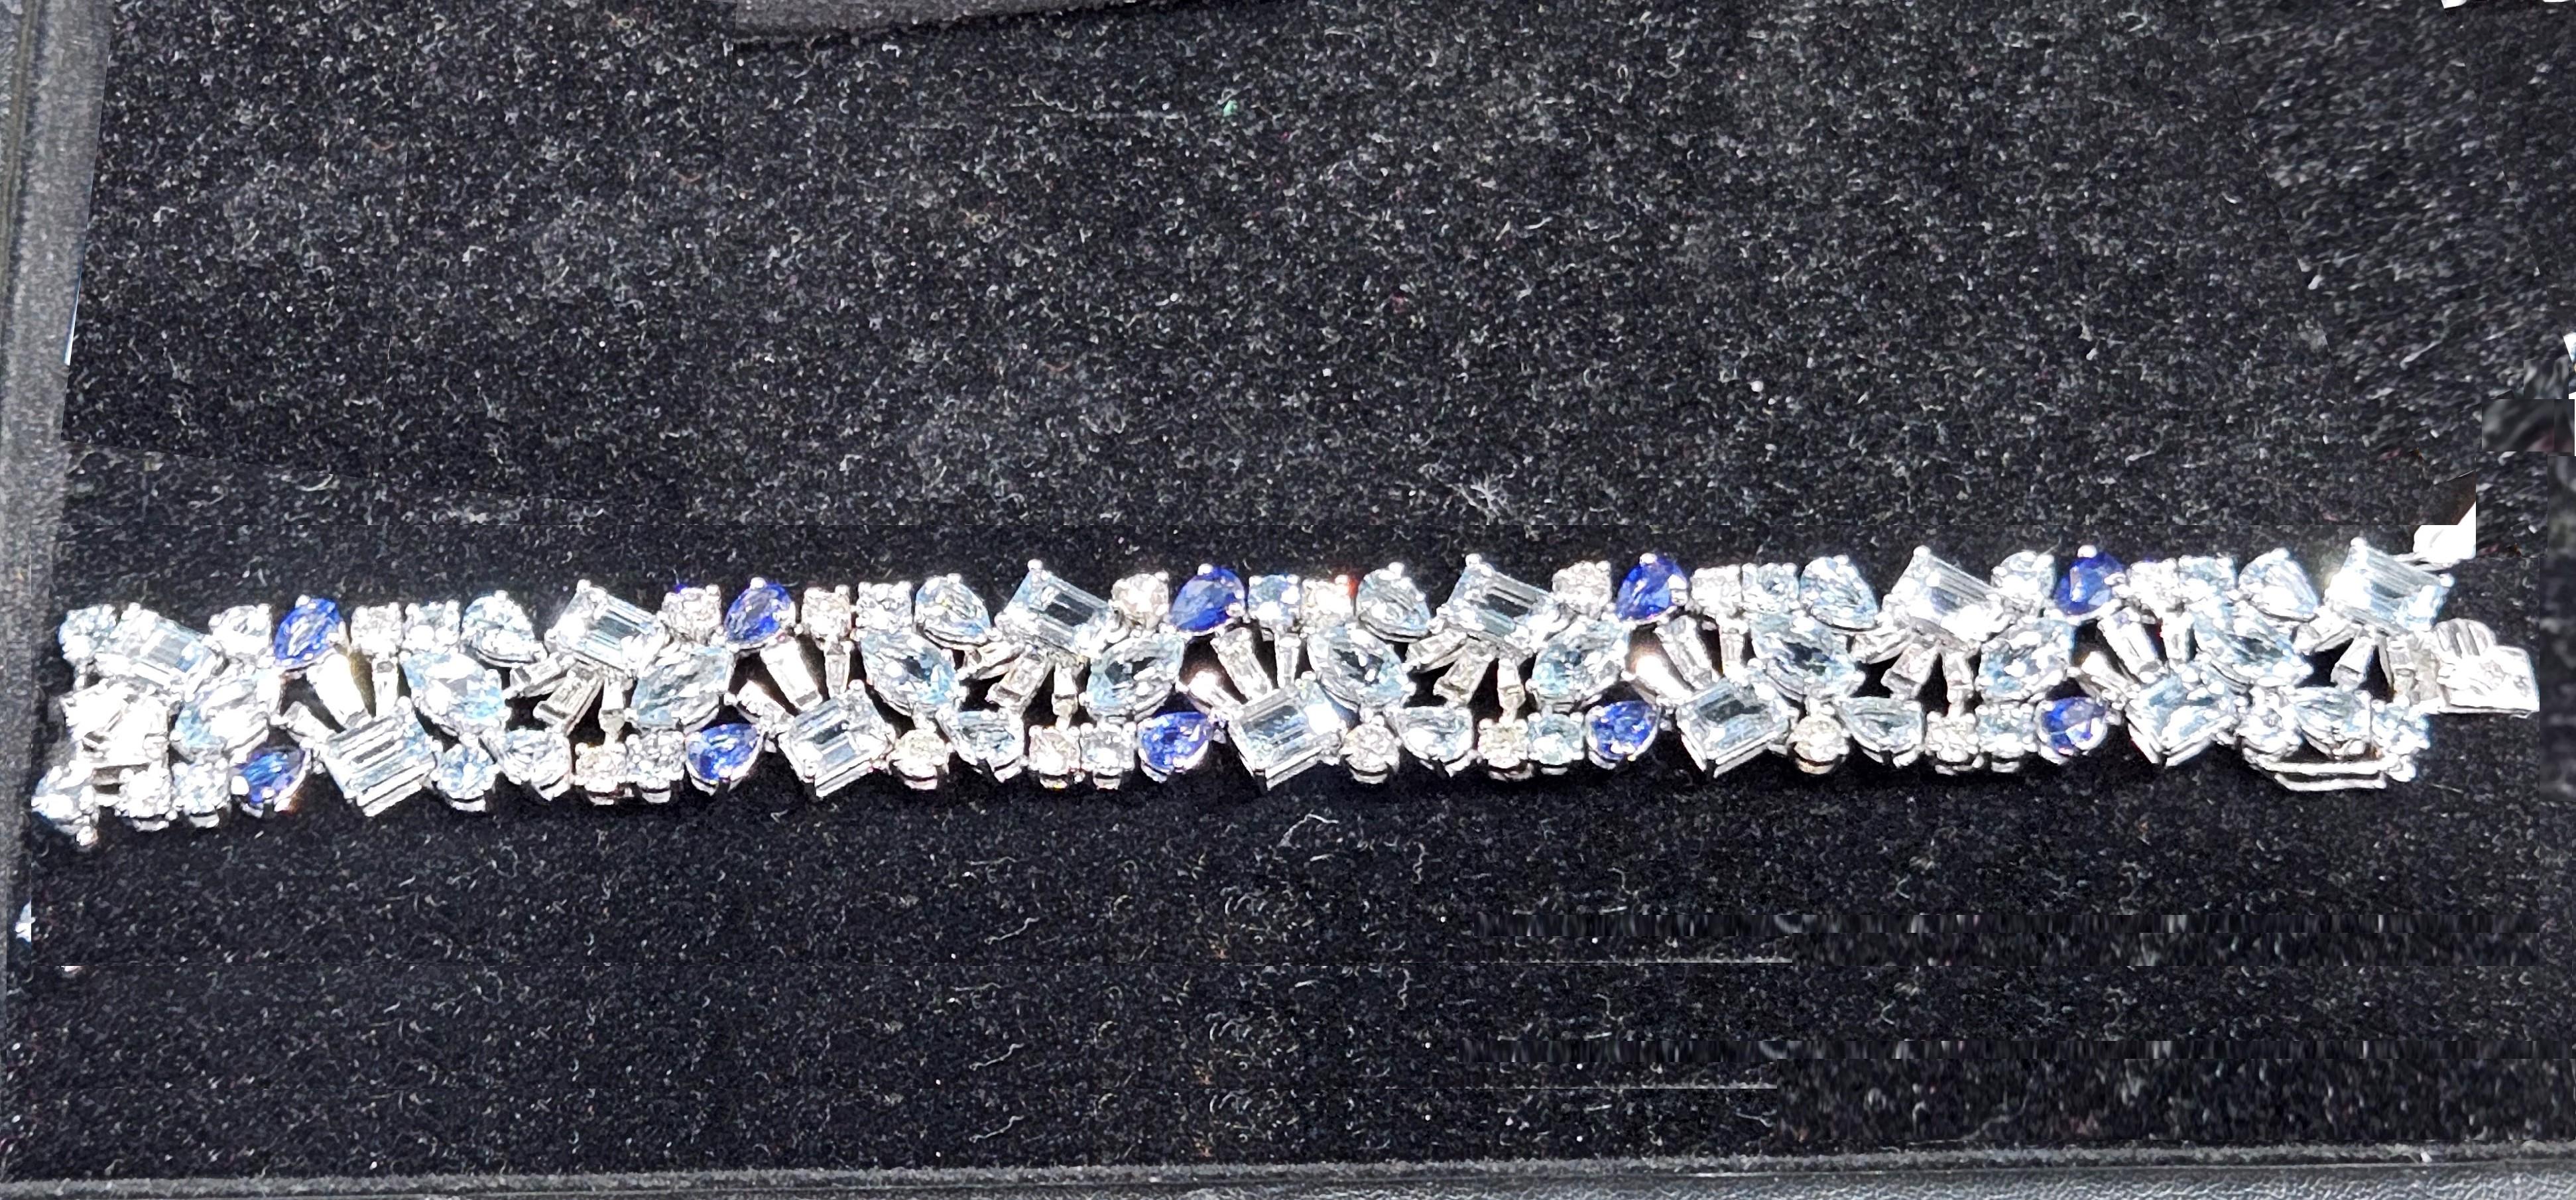 The Following Item we are offering are this Rare Important Radiant White Gold Gorgeous Glittering and Sparkling Magnificent Fancy Aquamarine, Blue Sapphire, Diamond Bracelet. Bracelet contains a Beautiful Array of Rare Fancy Large Aquamarines with